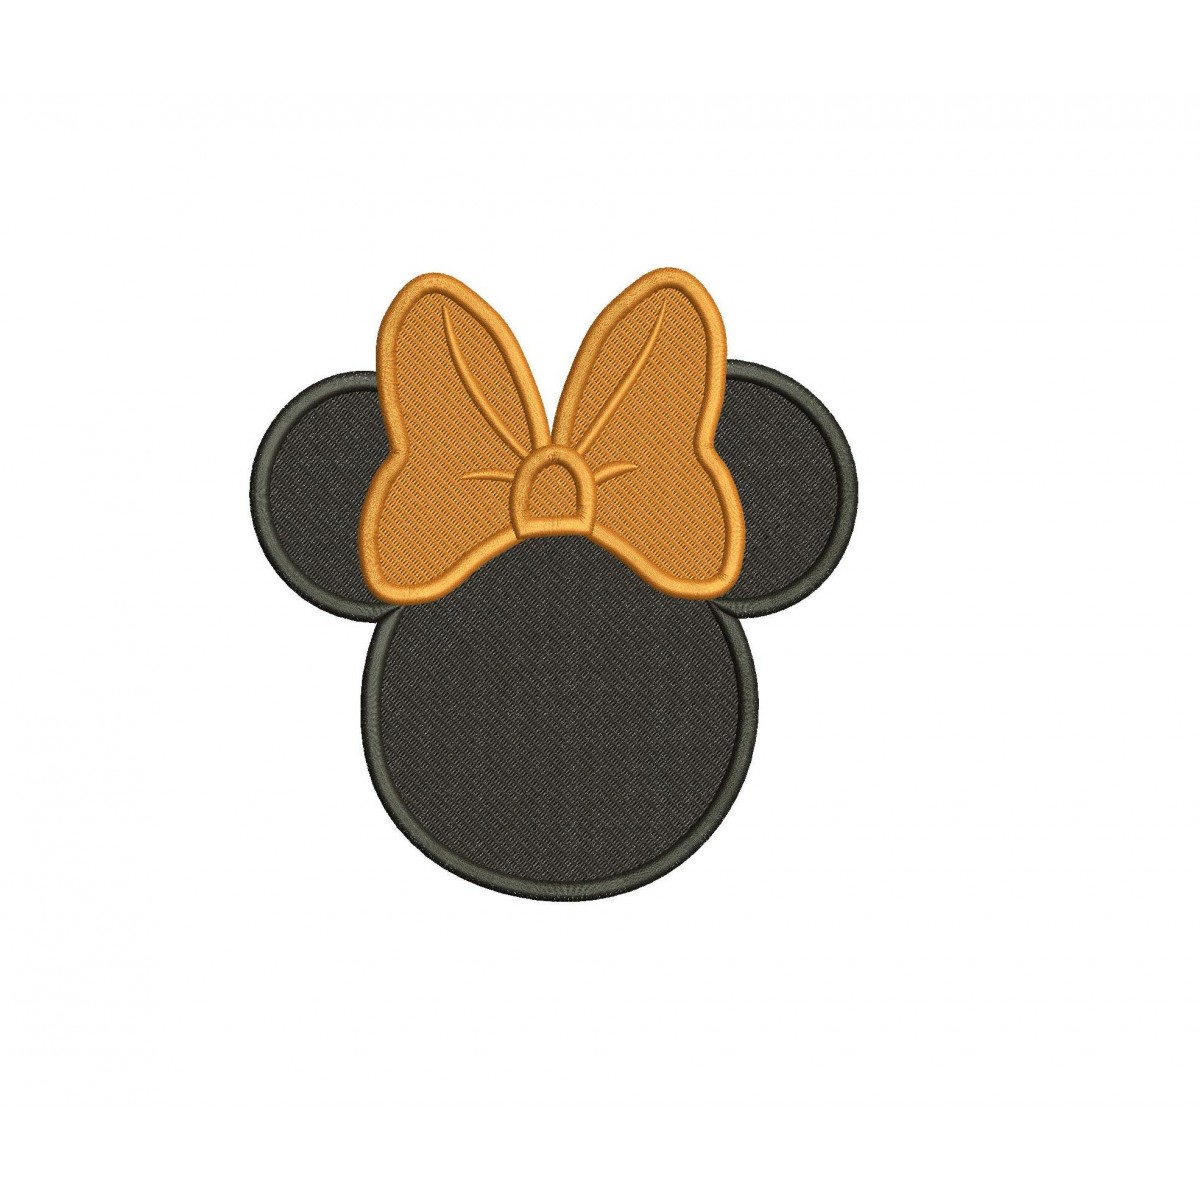 Minnie mouse patch Embroidery Designs for machine - Embroidery